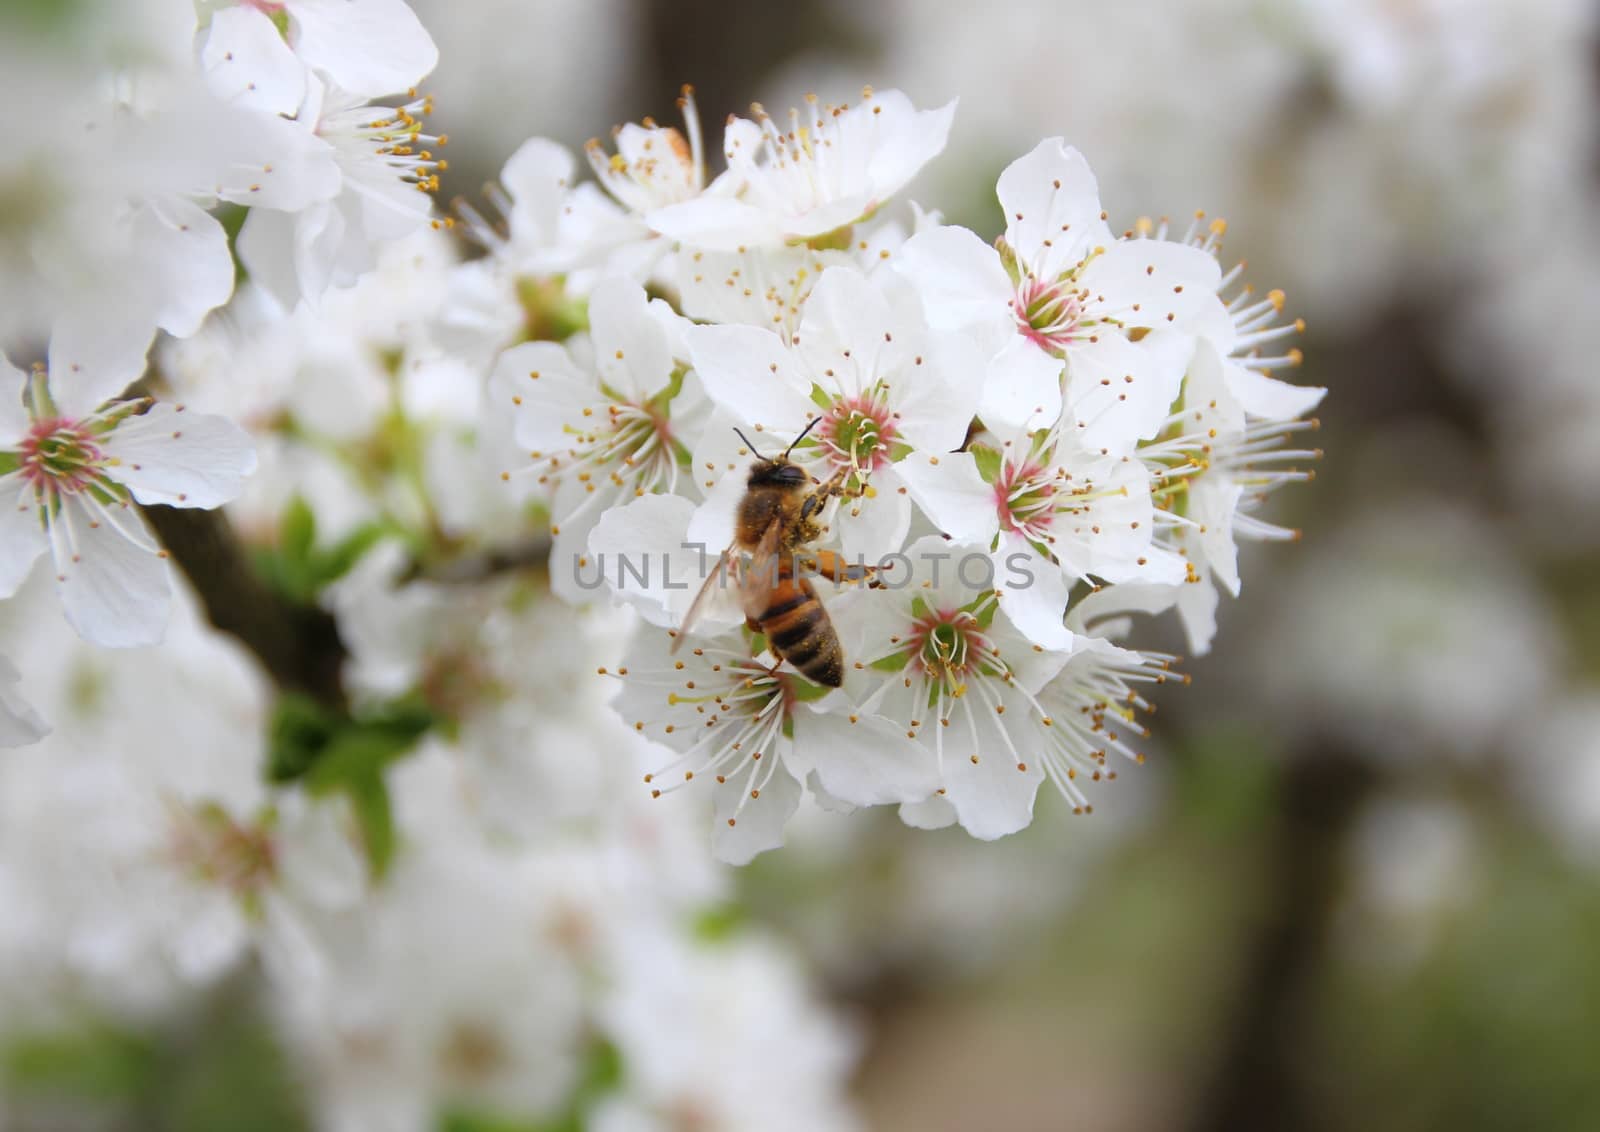 Isolated Bee on White Flower Tree Covered with Nectar by HoleInTheBox